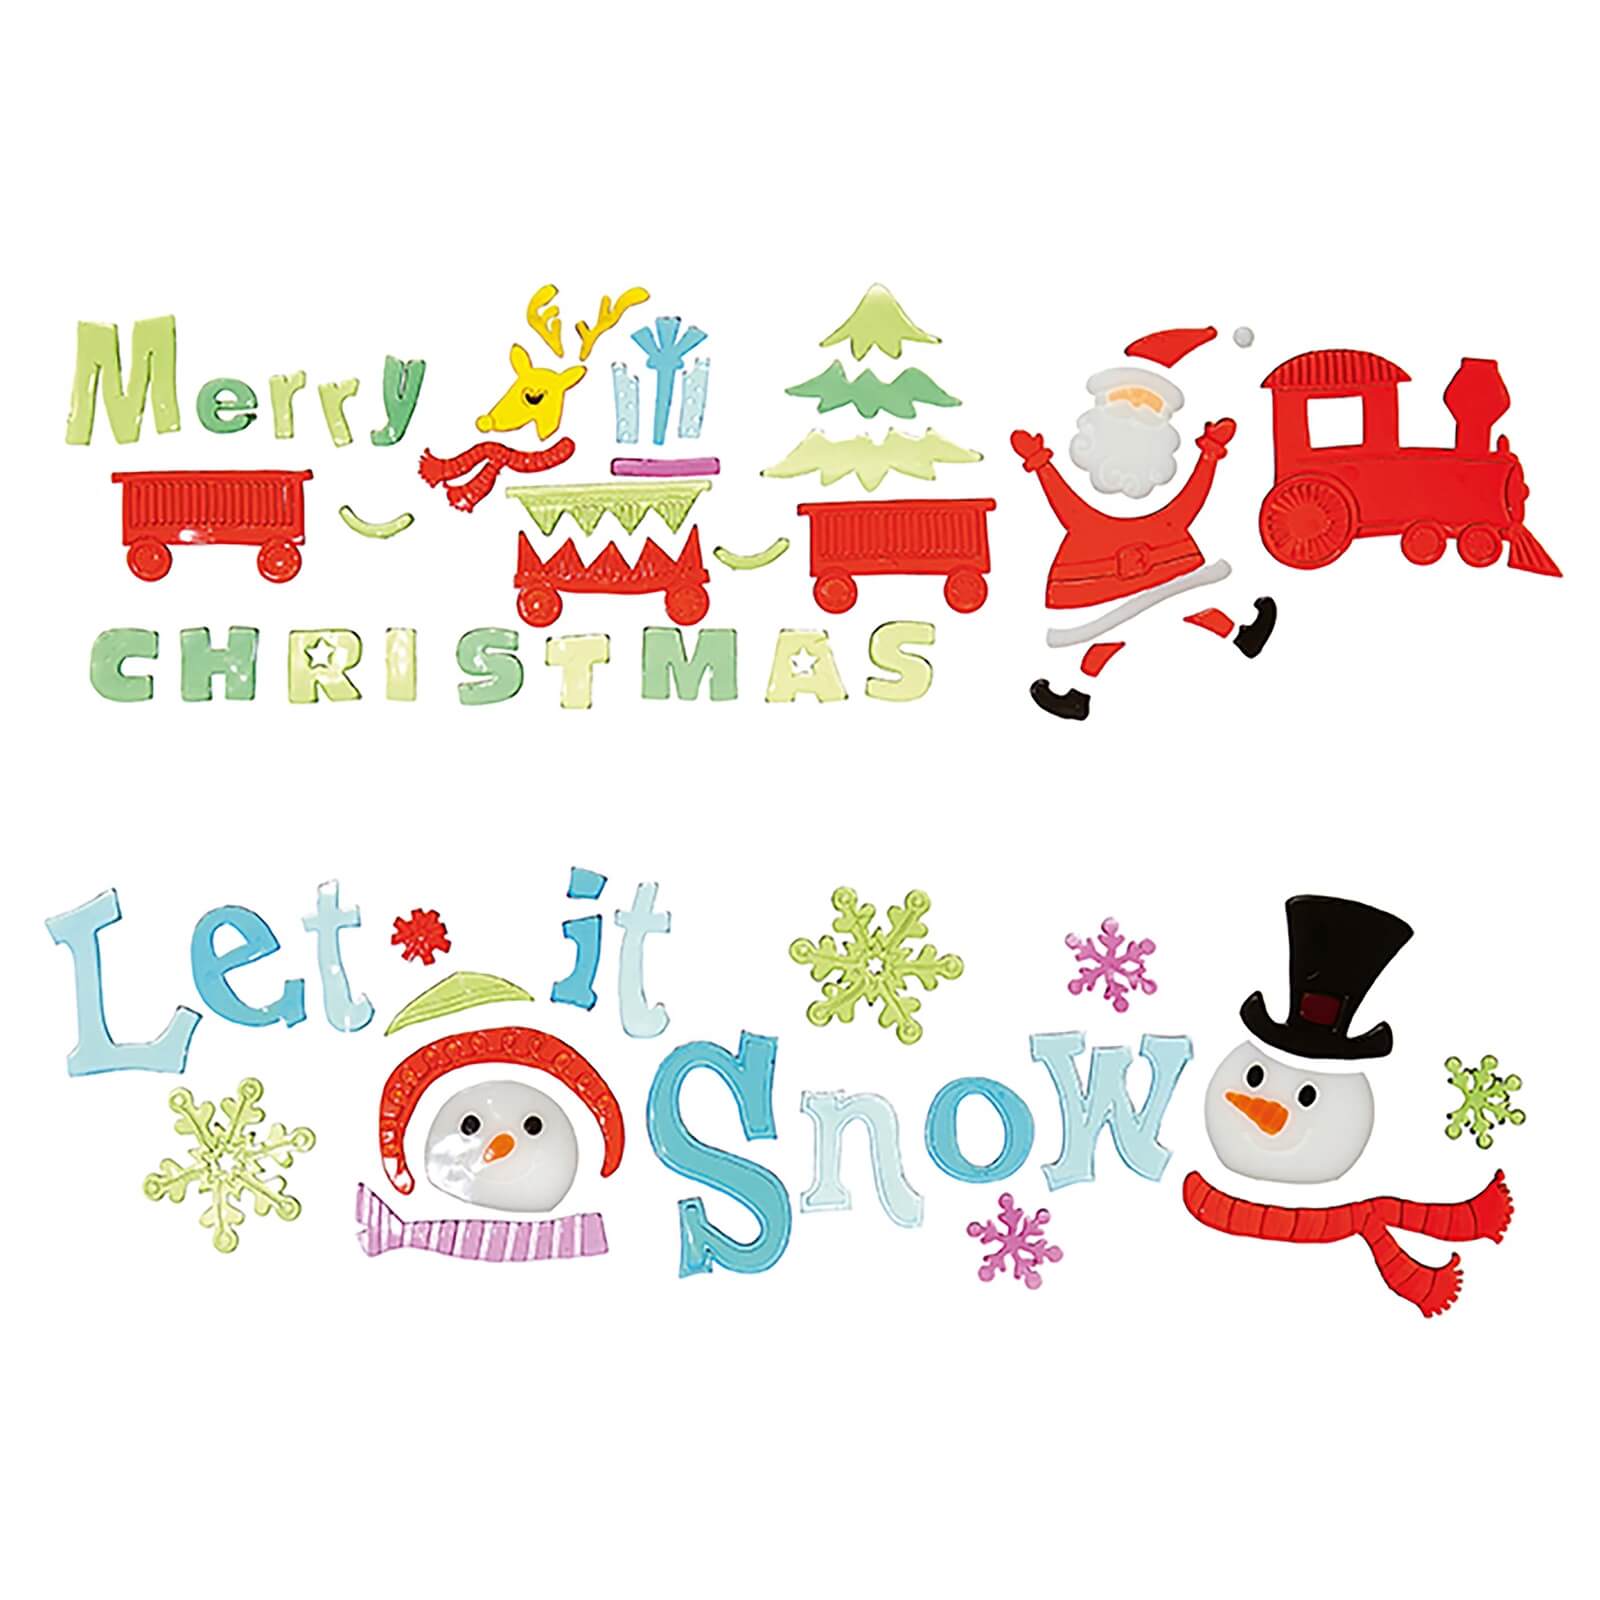 Let It Snow Merry Christmas Window Cling Christmas Decoration - Assortment